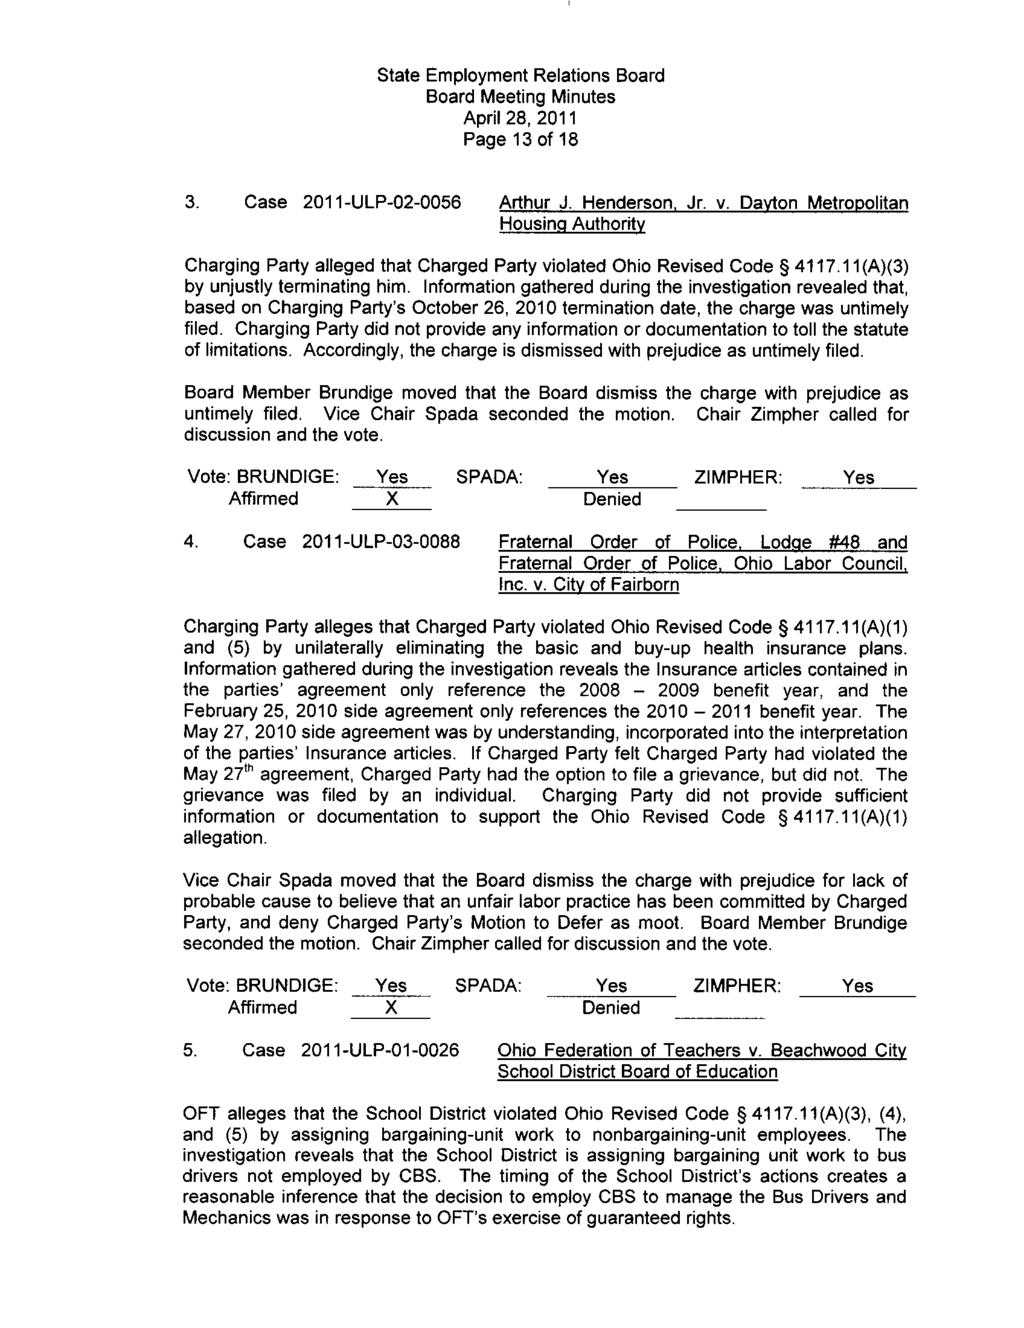 Page 13 of 18 3. Case 2011-ULP-02-0056 Arthur J. Henderson. Jr. v. Davton Metropolitan Housing Authority Charging Party alleged that Charged Party violated Ohio Revised Code 4117.